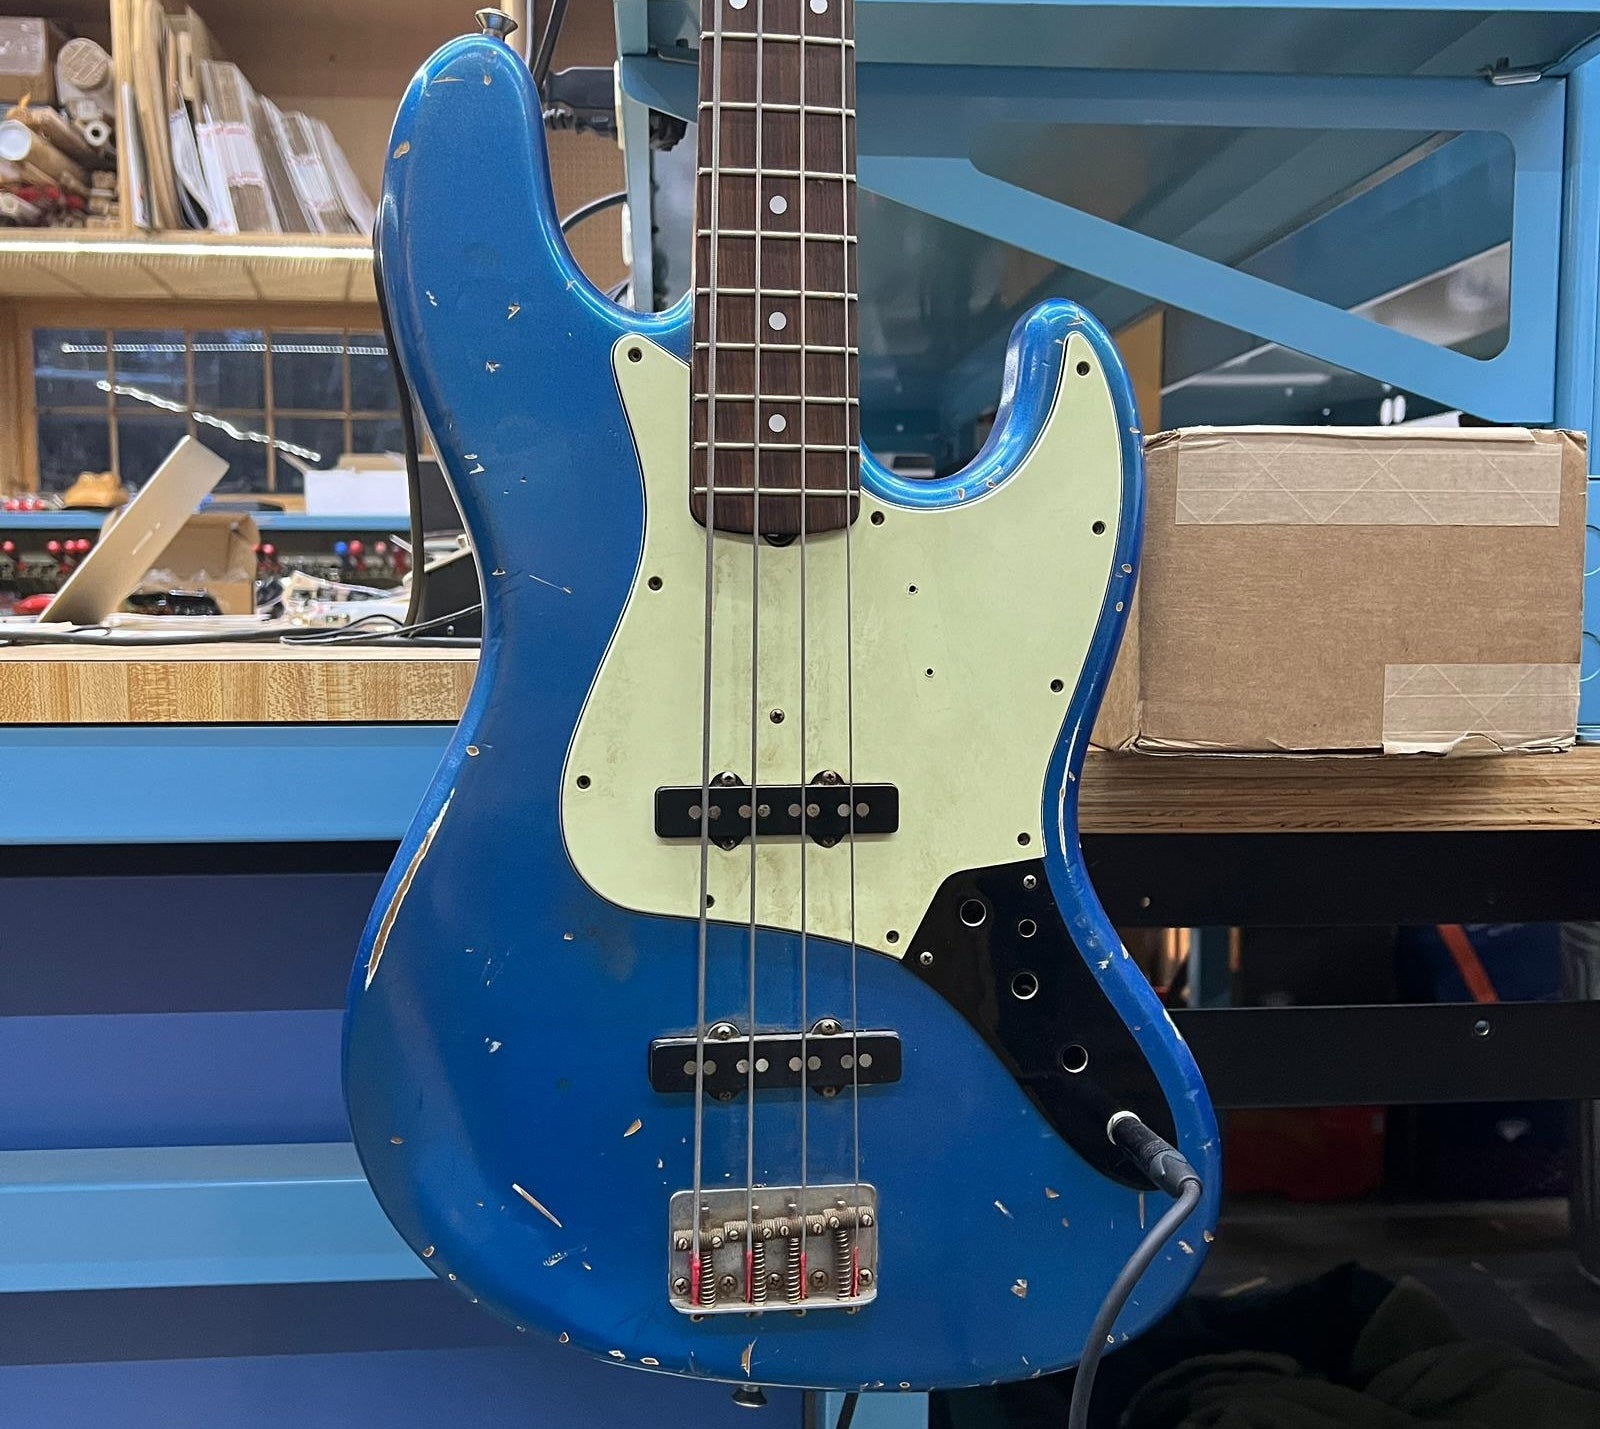 A Jazz Bass used for testing preamps at the Fat Bass Tone Shop